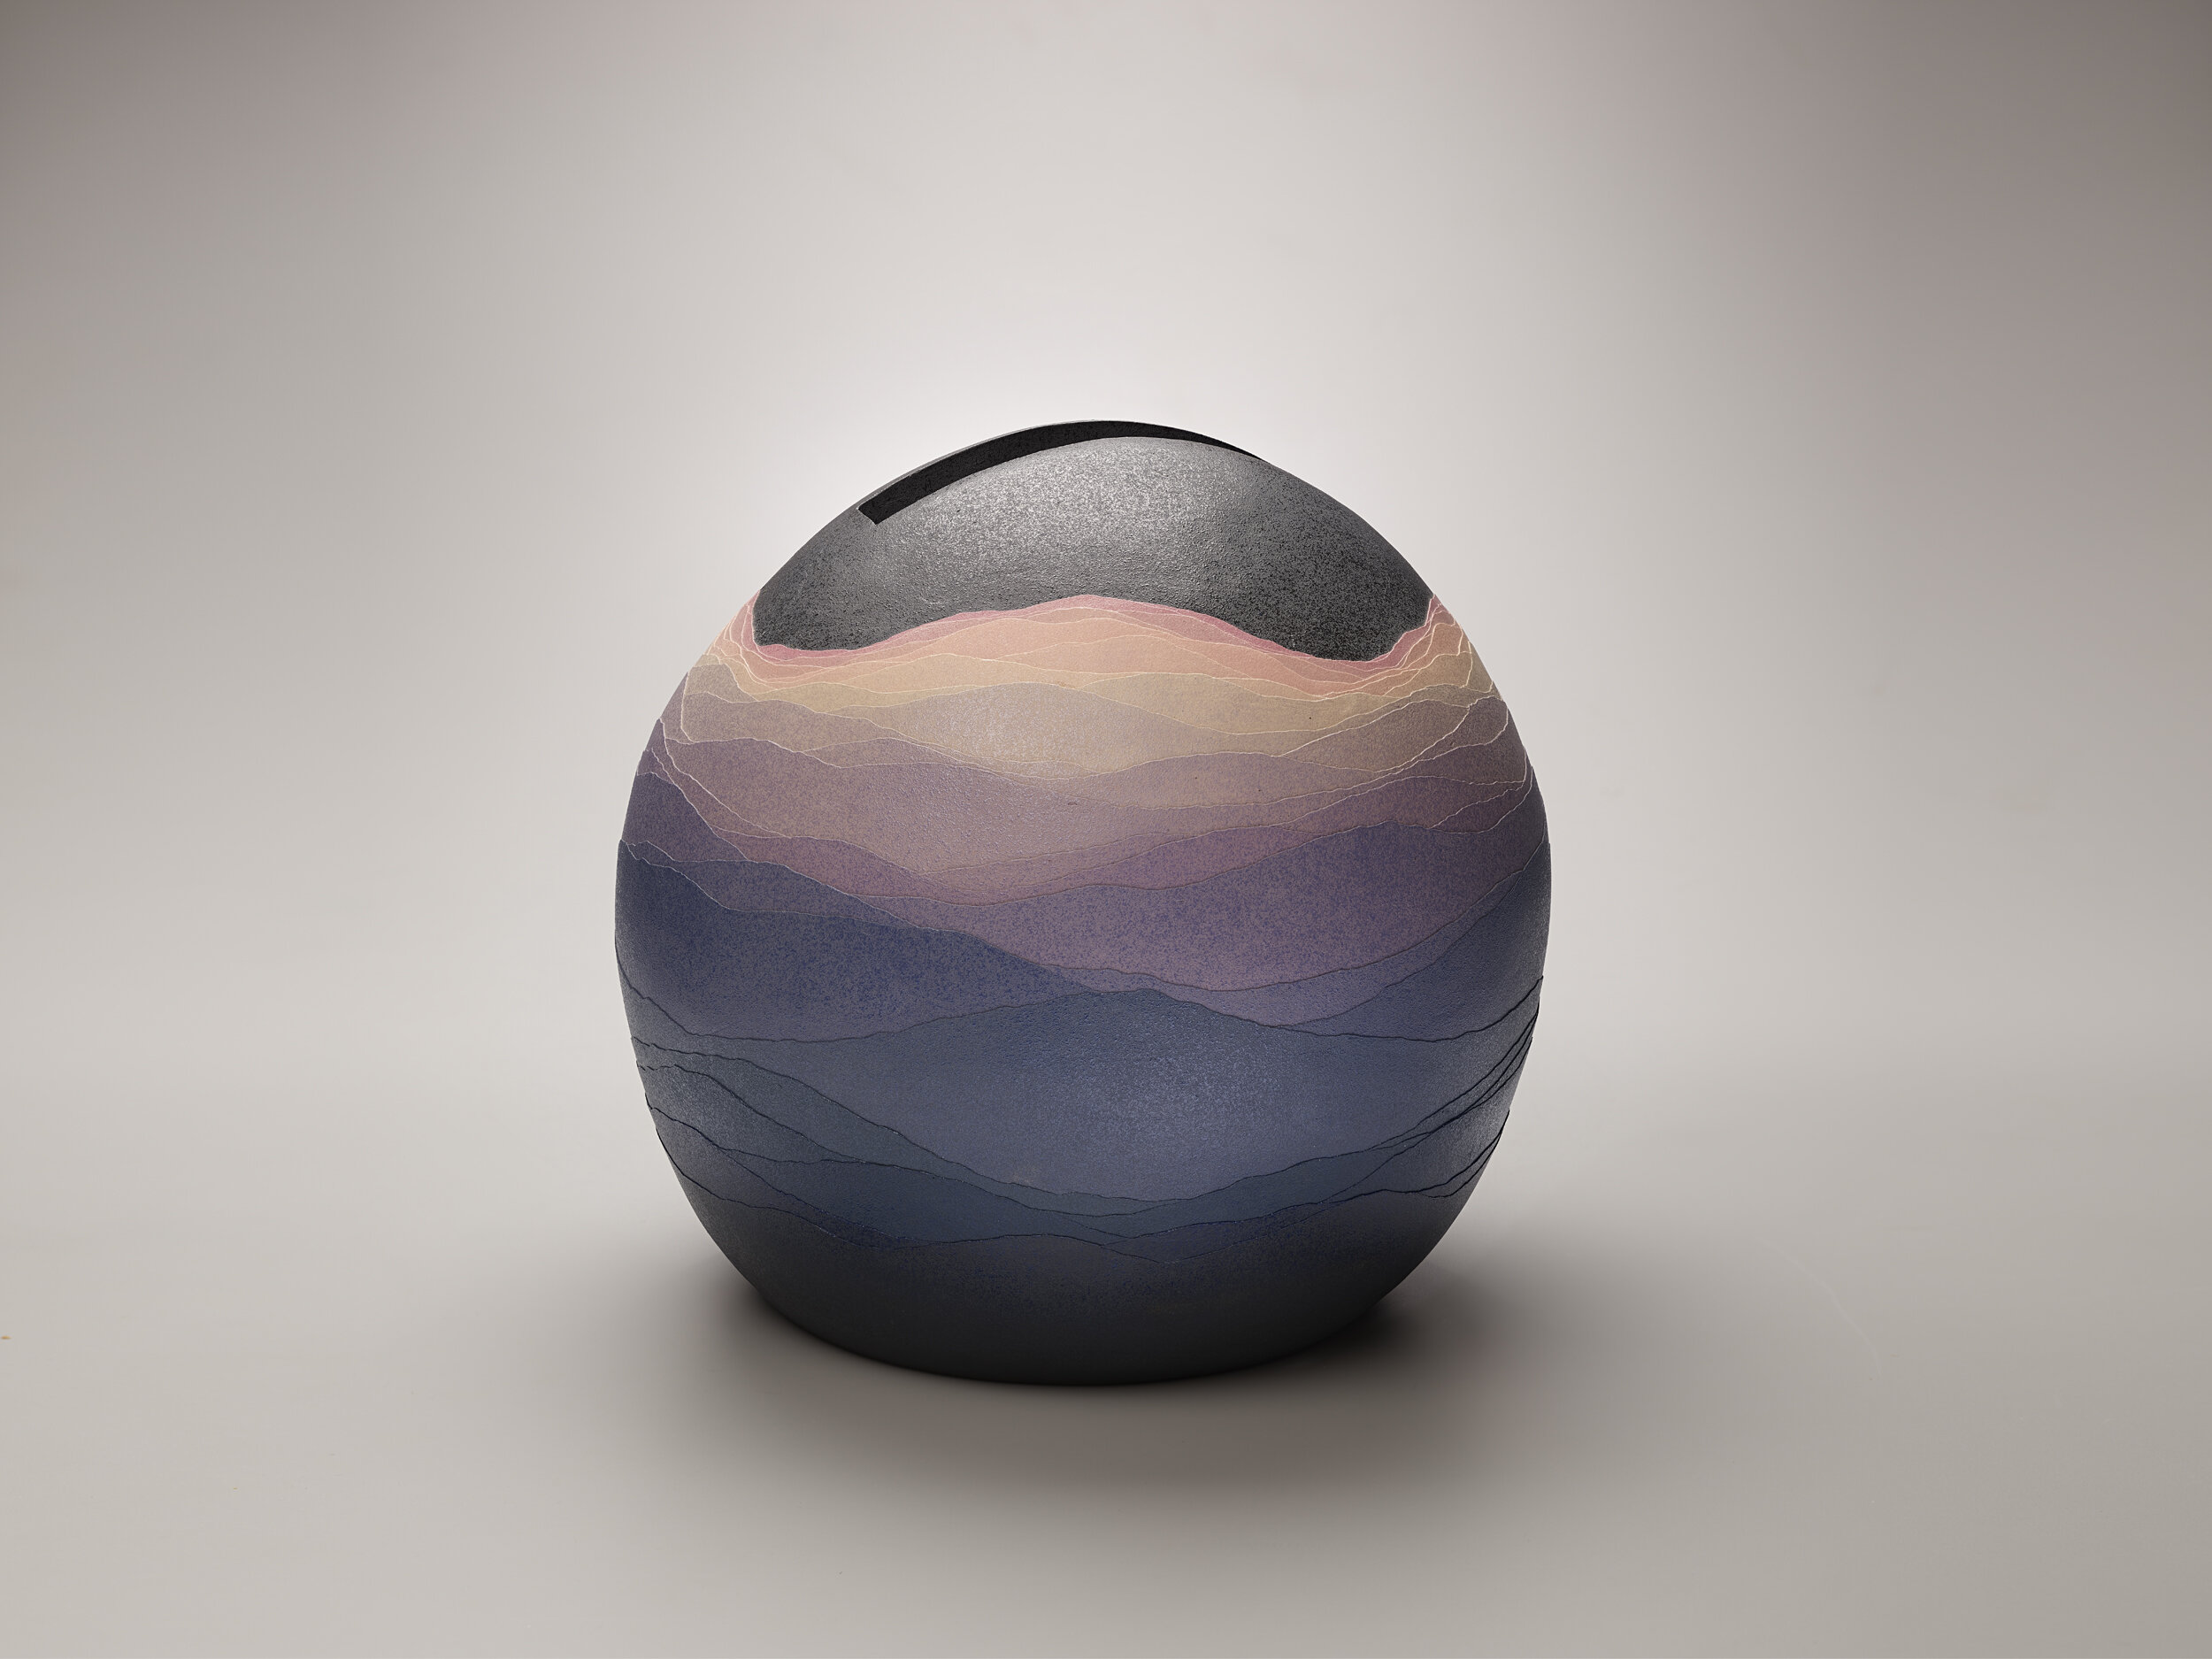  Miyashita Zenji (Japanese, 1939-2012), Enkū (Spherical Void), 1999, stoneware with appliquéd bands of saidei (“colored clay”: thin, dyed layers of clay), 14 3/4 in x 15 5/8 in x 16 in, Museum Purchase: Funds provided by Richard Kroll. Portland Art M